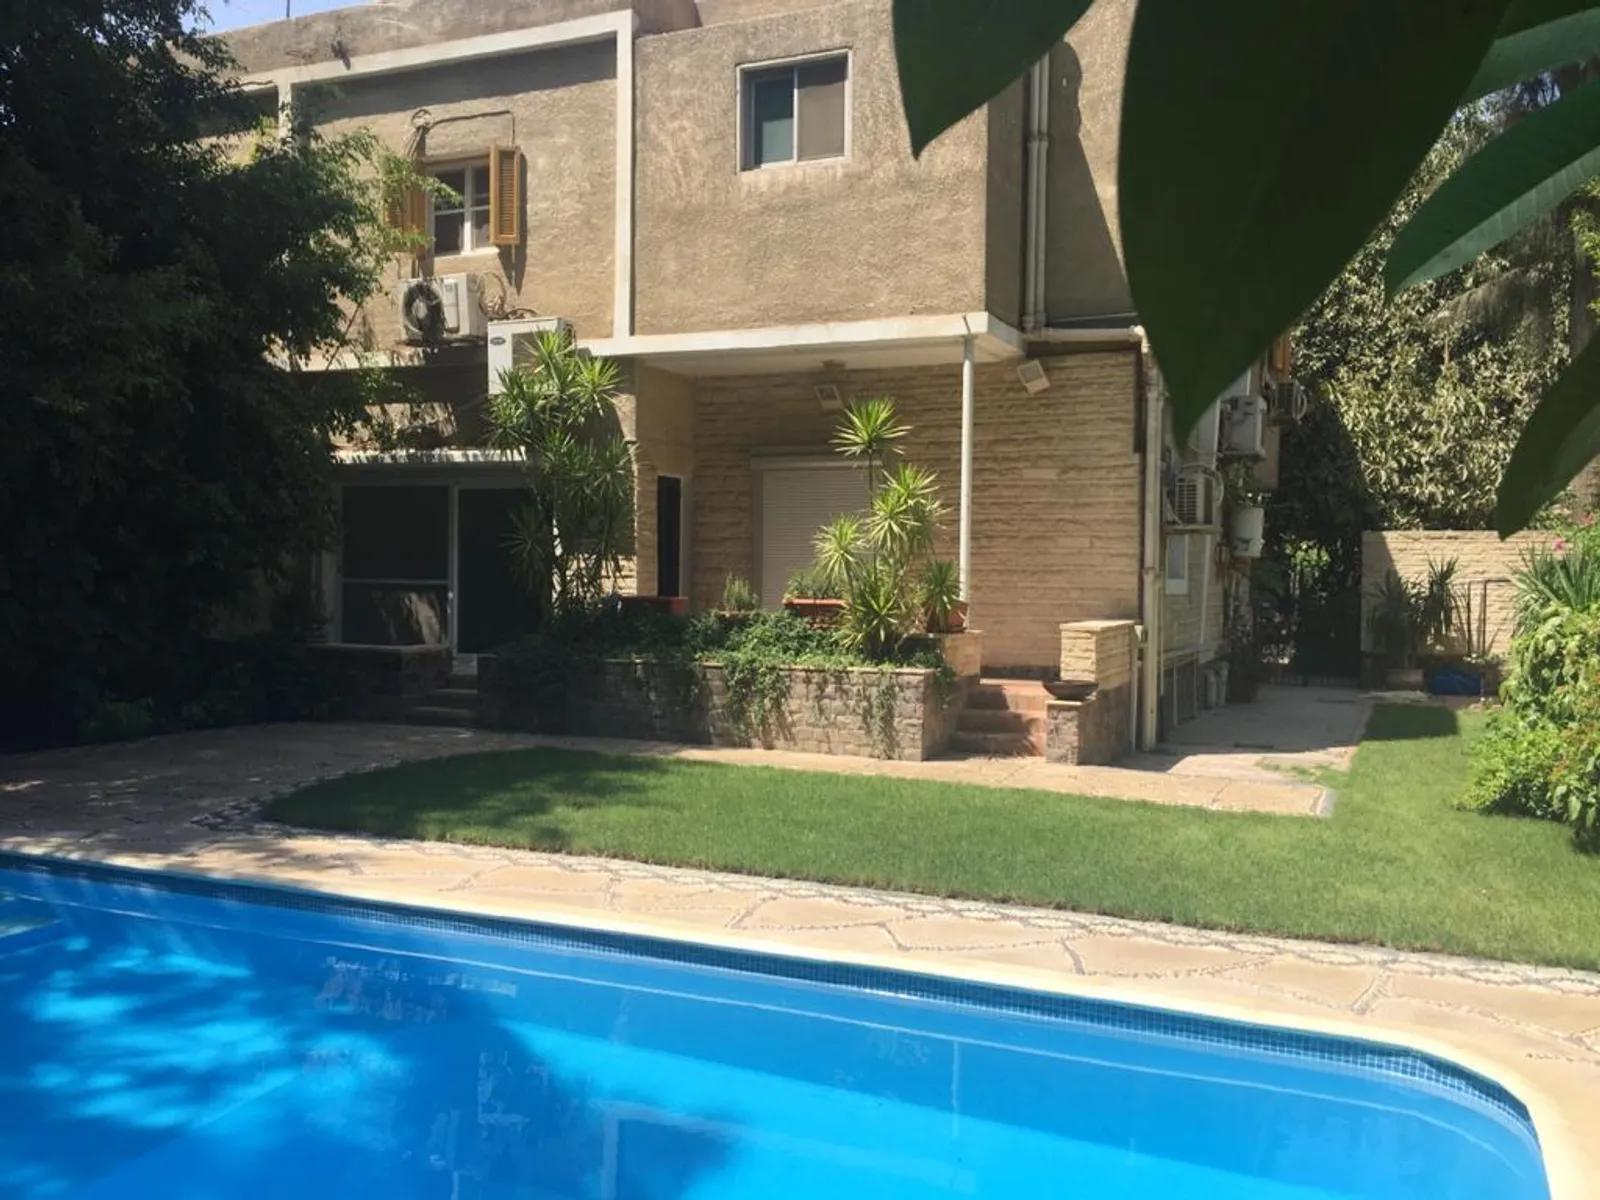 AMAZING VILLA WITH PRIVATE POOL FOR RENT IN MAADI DEGLA NEXT TO CAIRO AMERICAN COLLEGE (C.A.C) - #4963 - Semi furnished